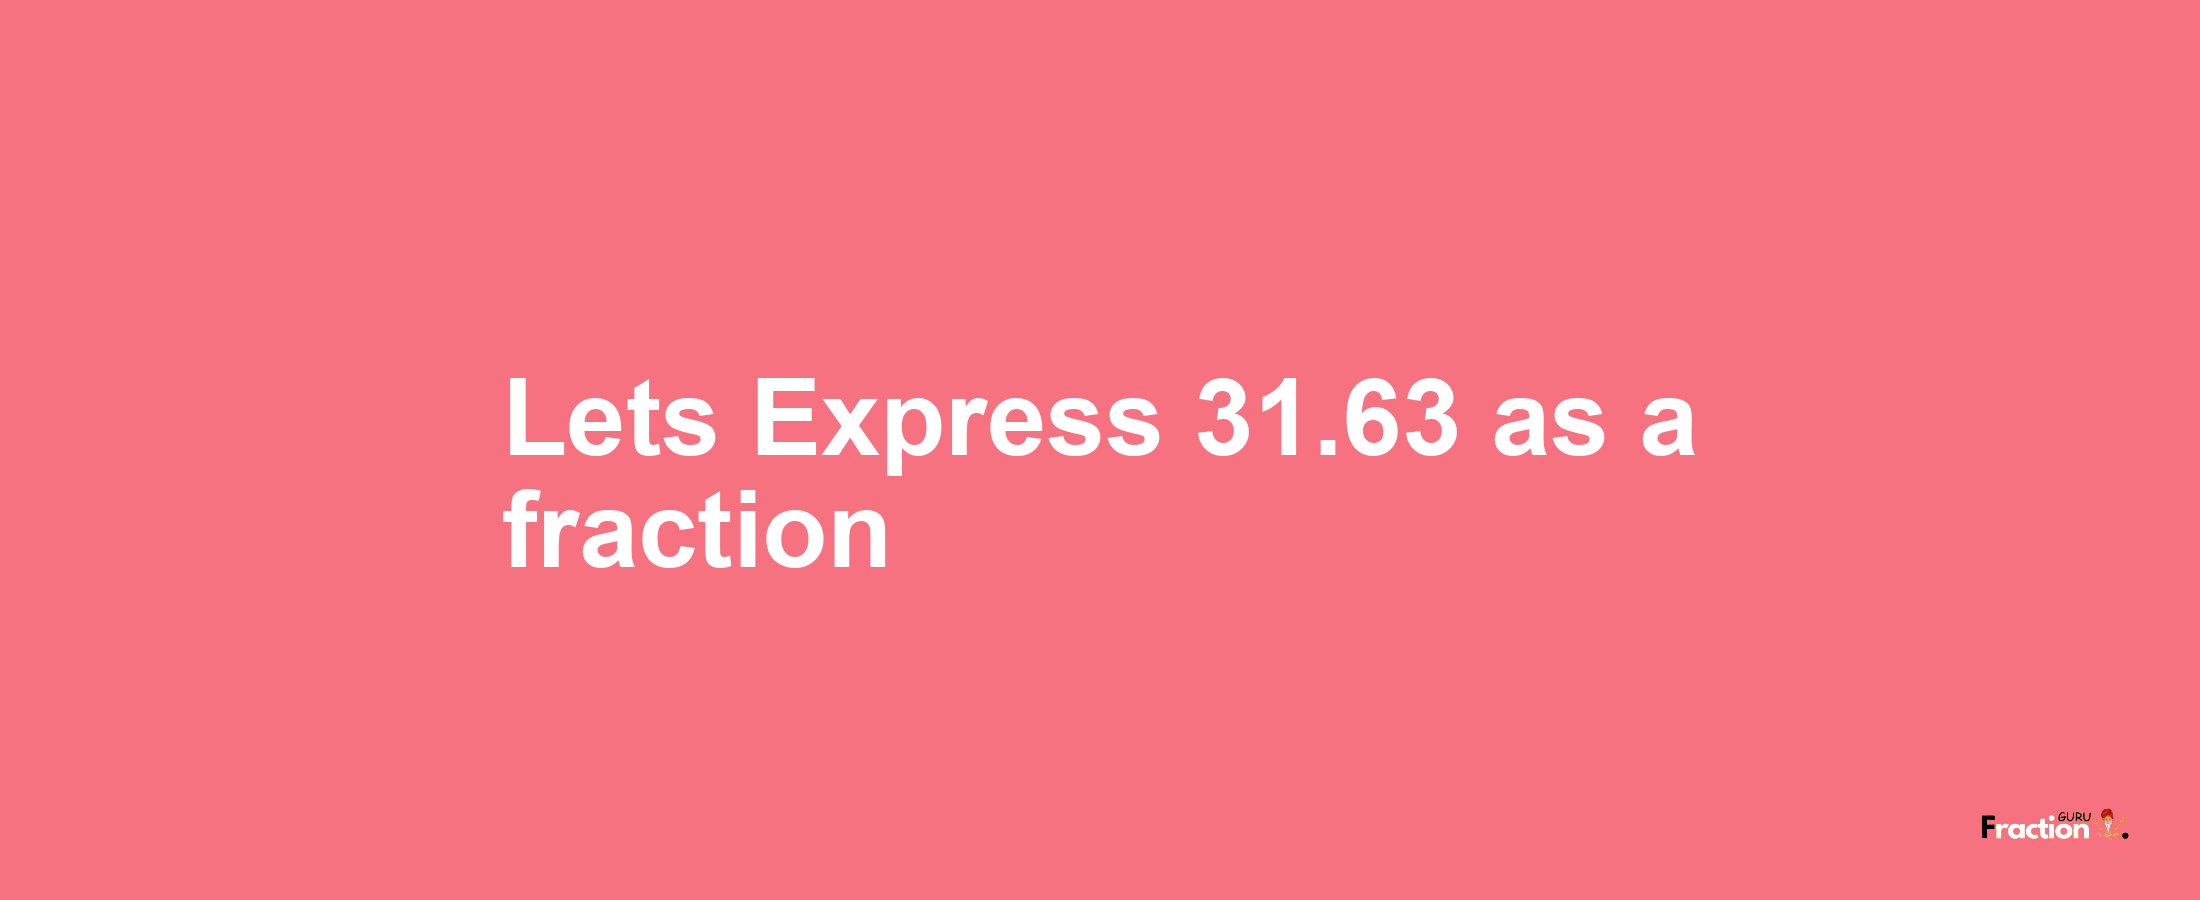 Lets Express 31.63 as afraction